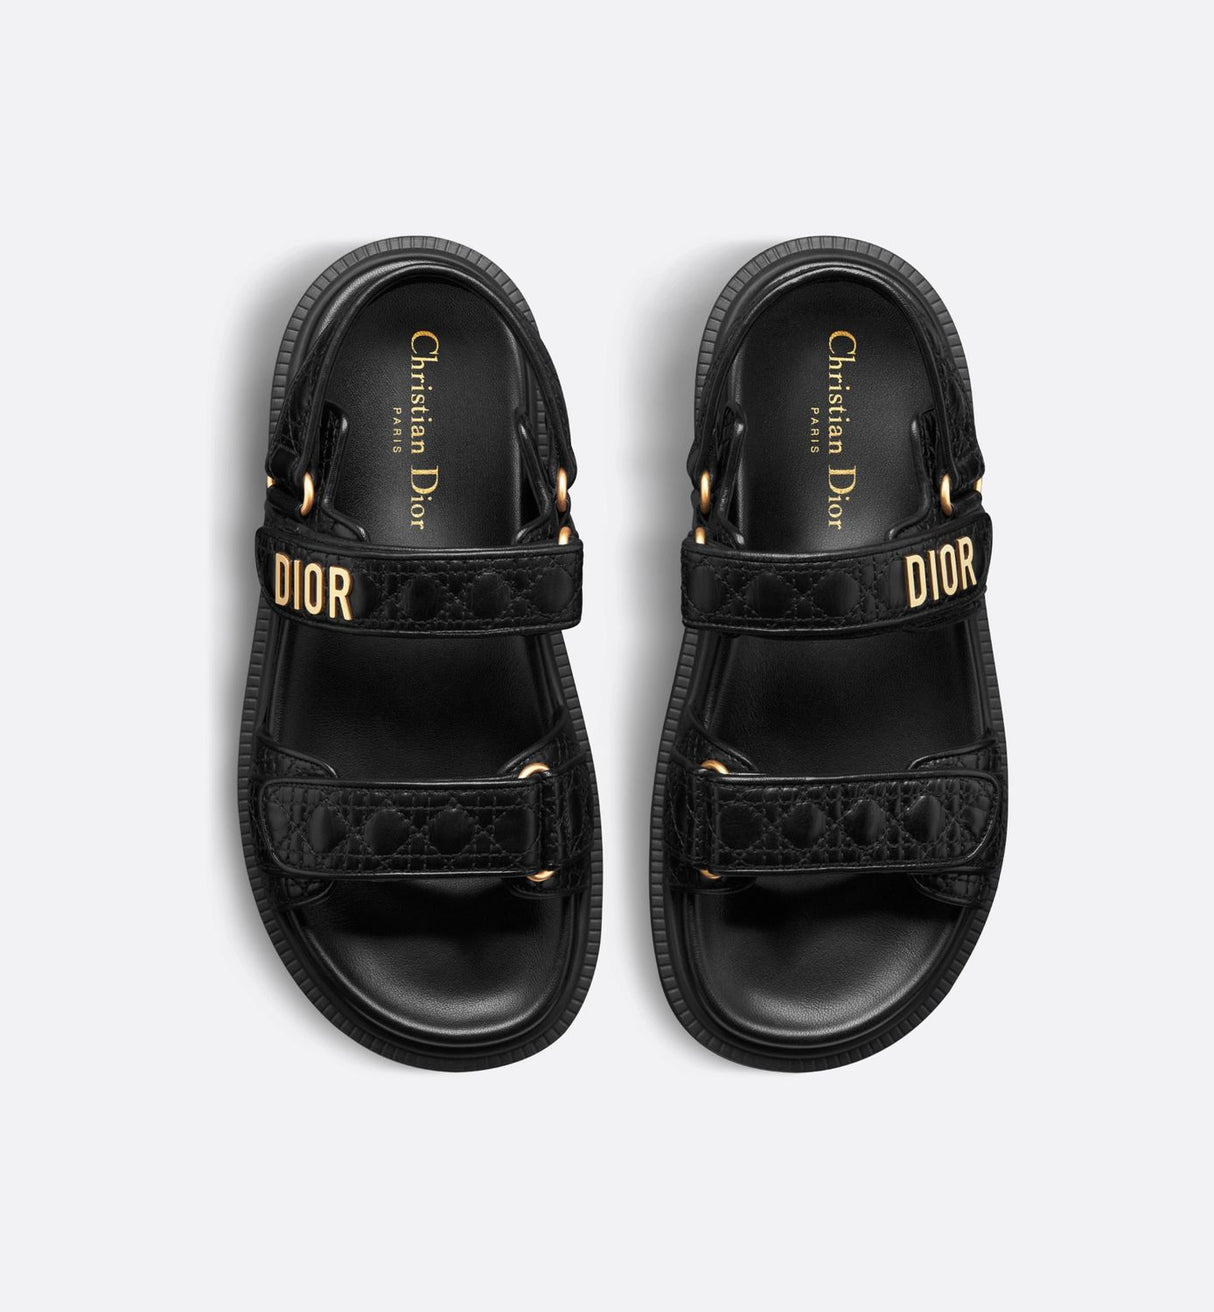 DIOR Stylish Black Sandals for Women - SS24 Collection